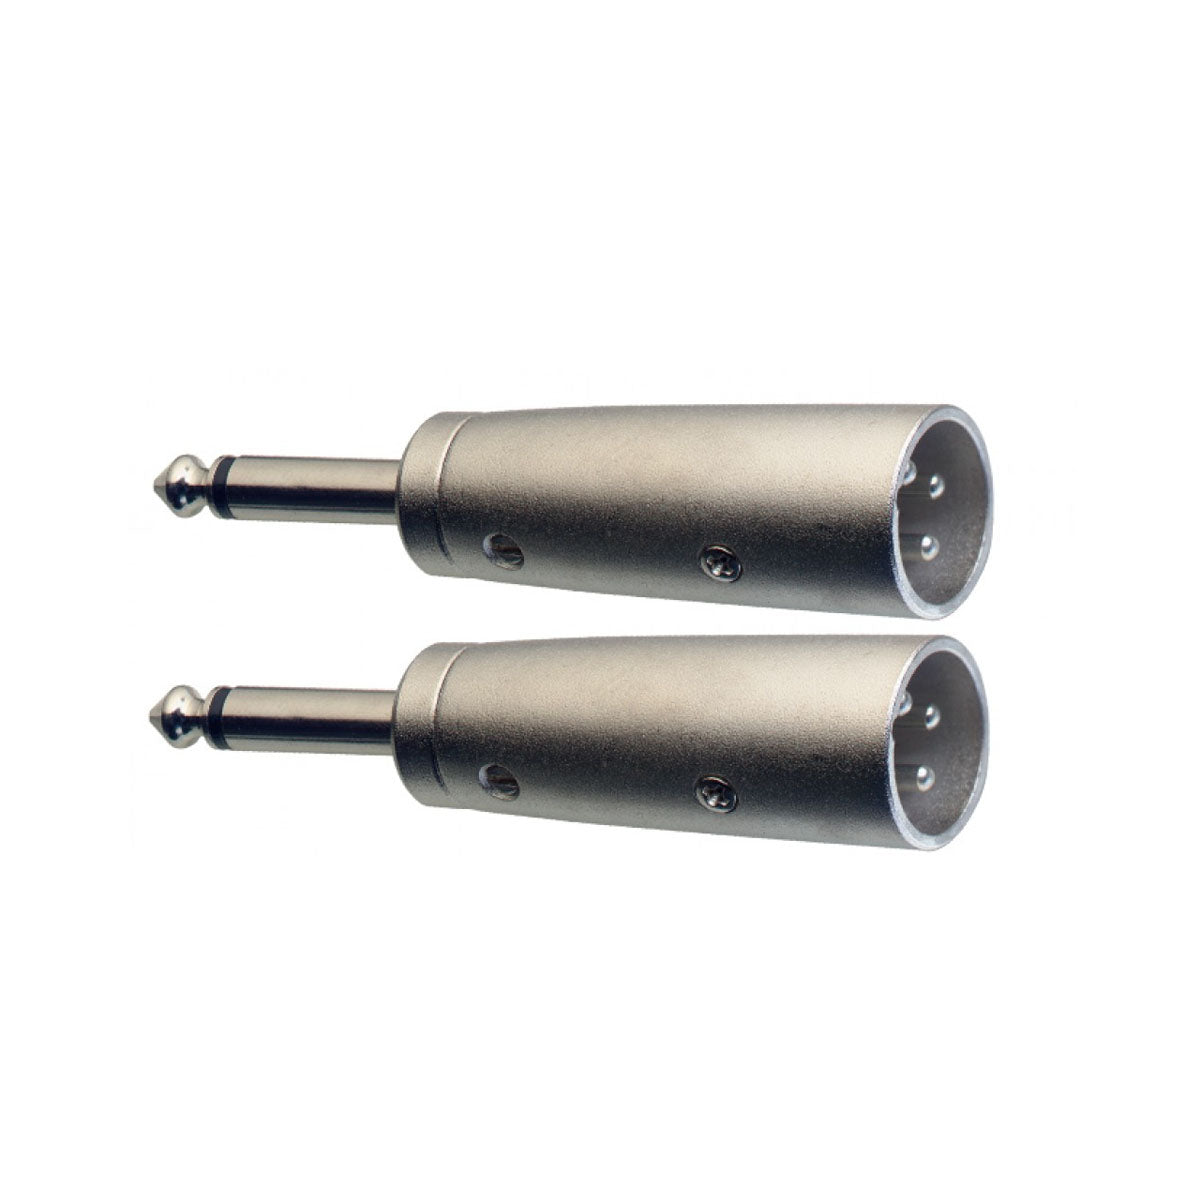 Stagg Audio Adapters - Male XLR To 1/4" Jack Plug (Pack of 2)